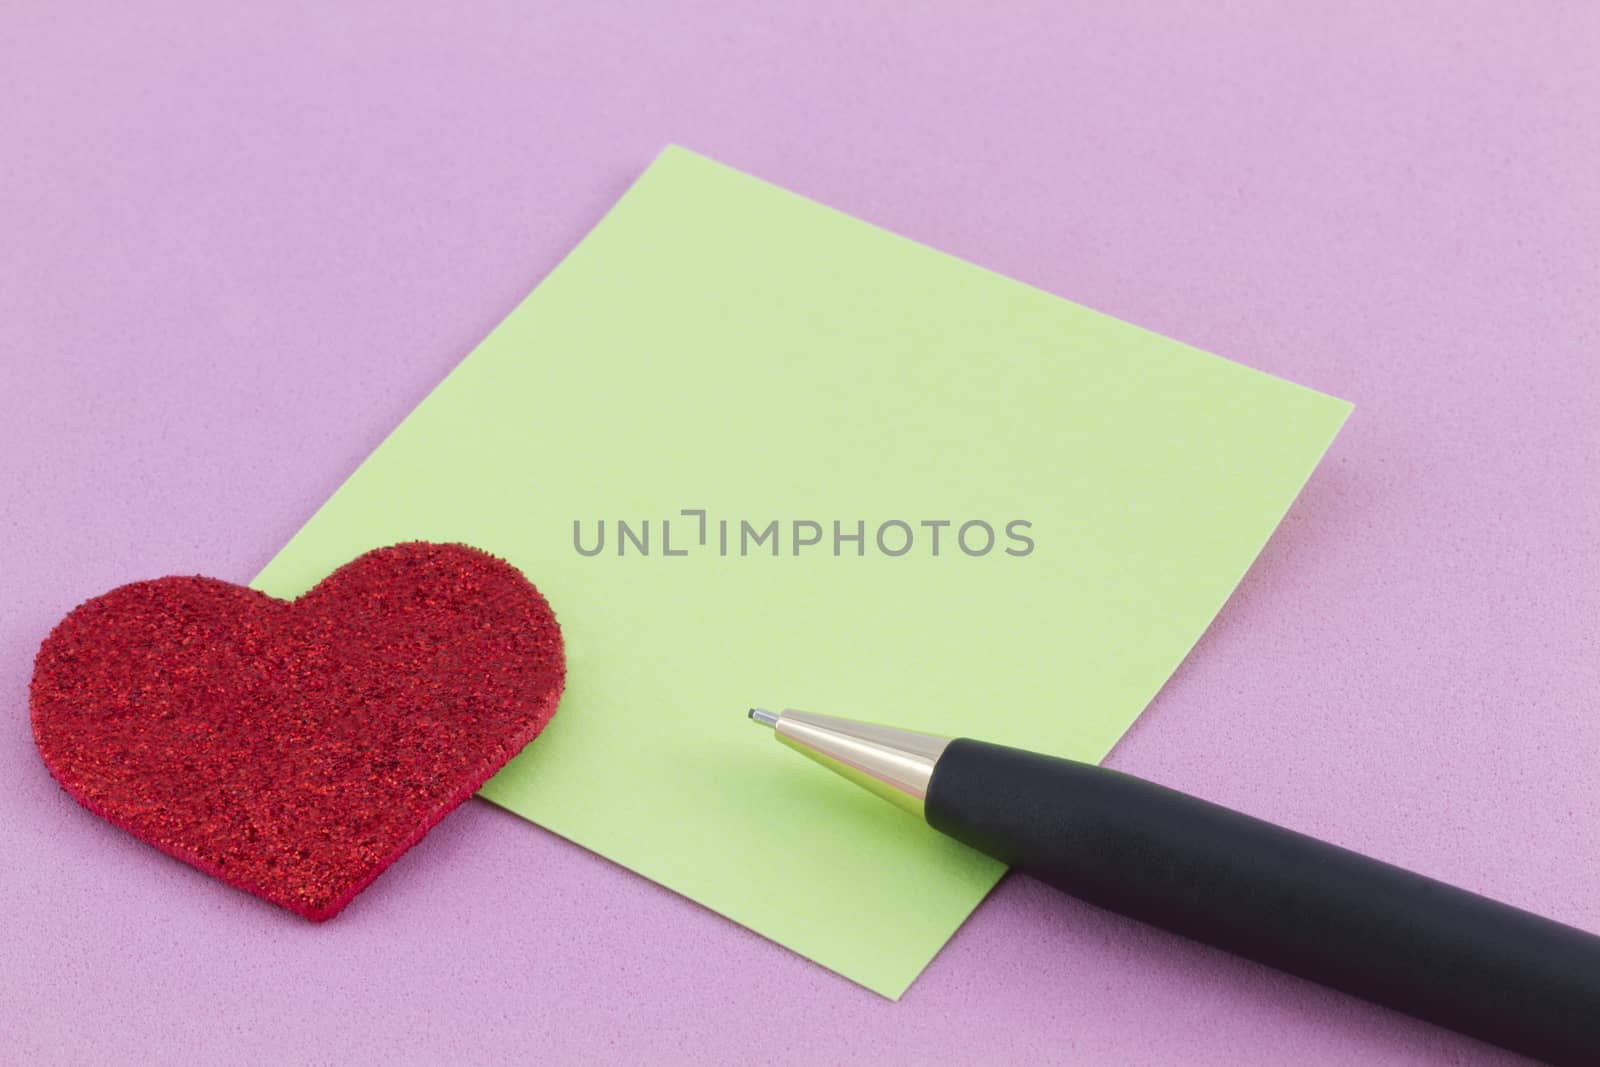 Red heart, green note, and pen on pink background by fmcginn